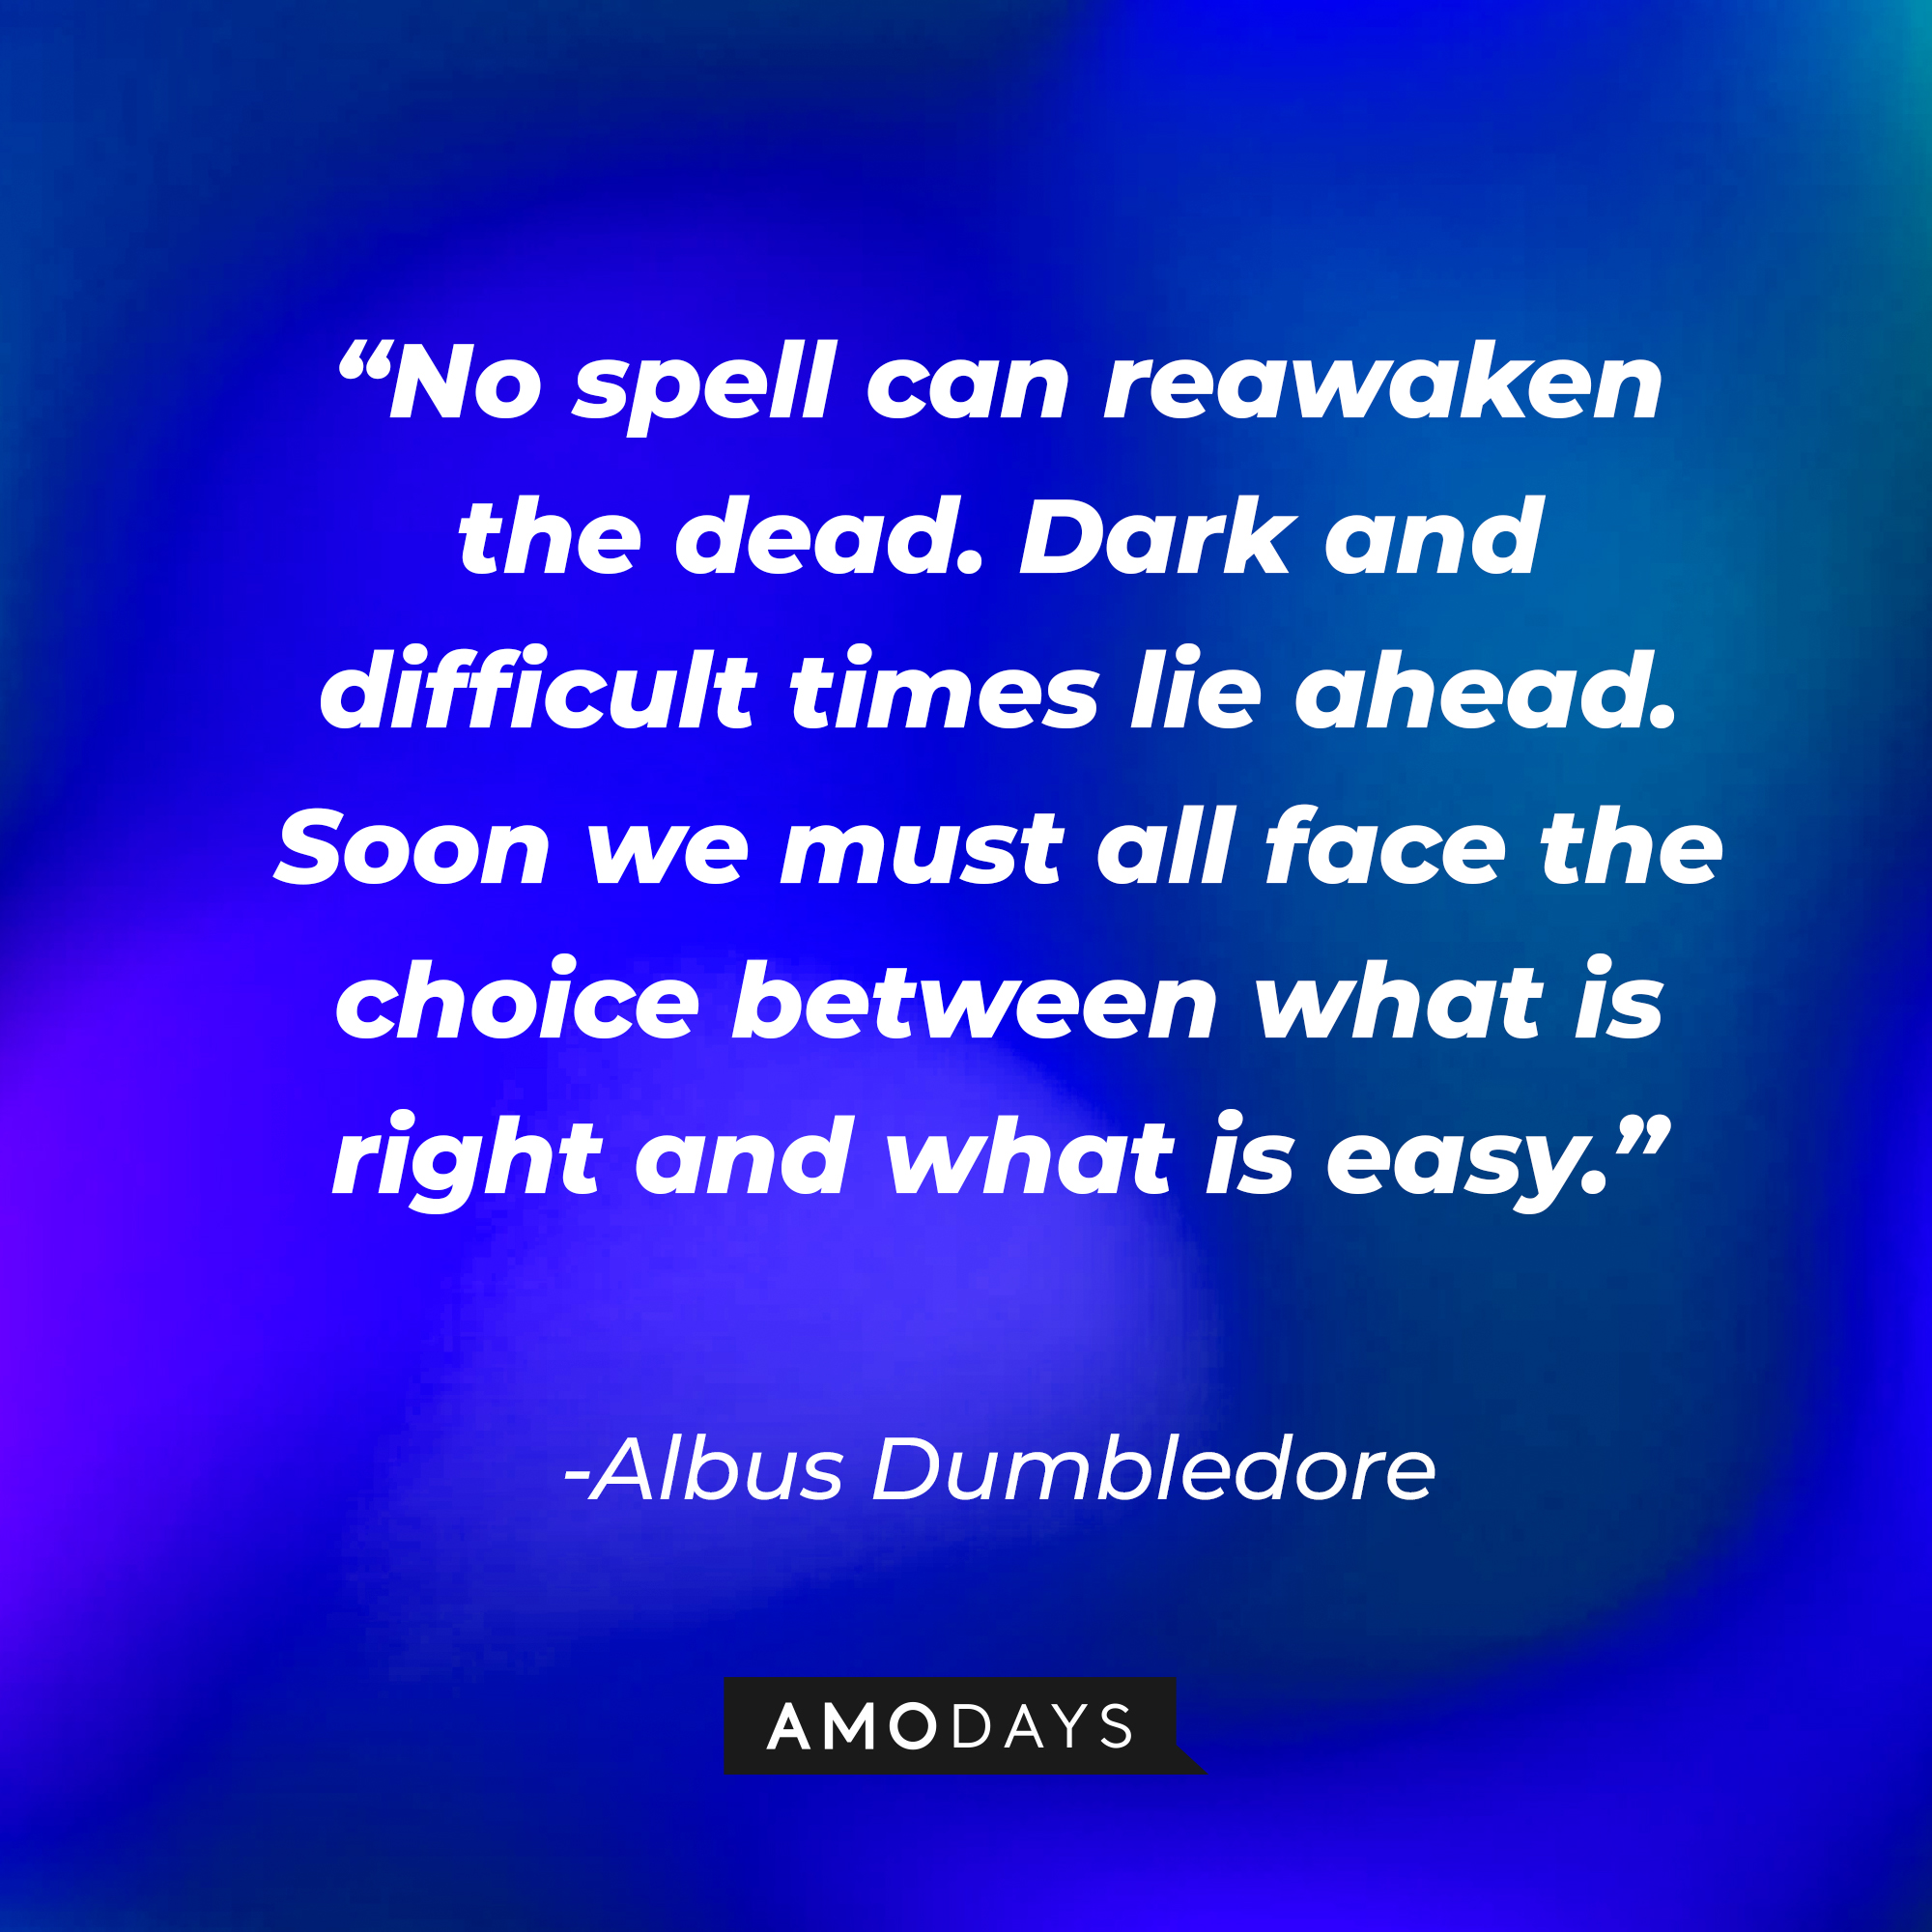 Albus Dumbledore's quote: “No spell can reawaken the dead. Dark and difficult times lie ahead. Soon we must all face the choice between what is right and what is easy.” | Image: Amodays